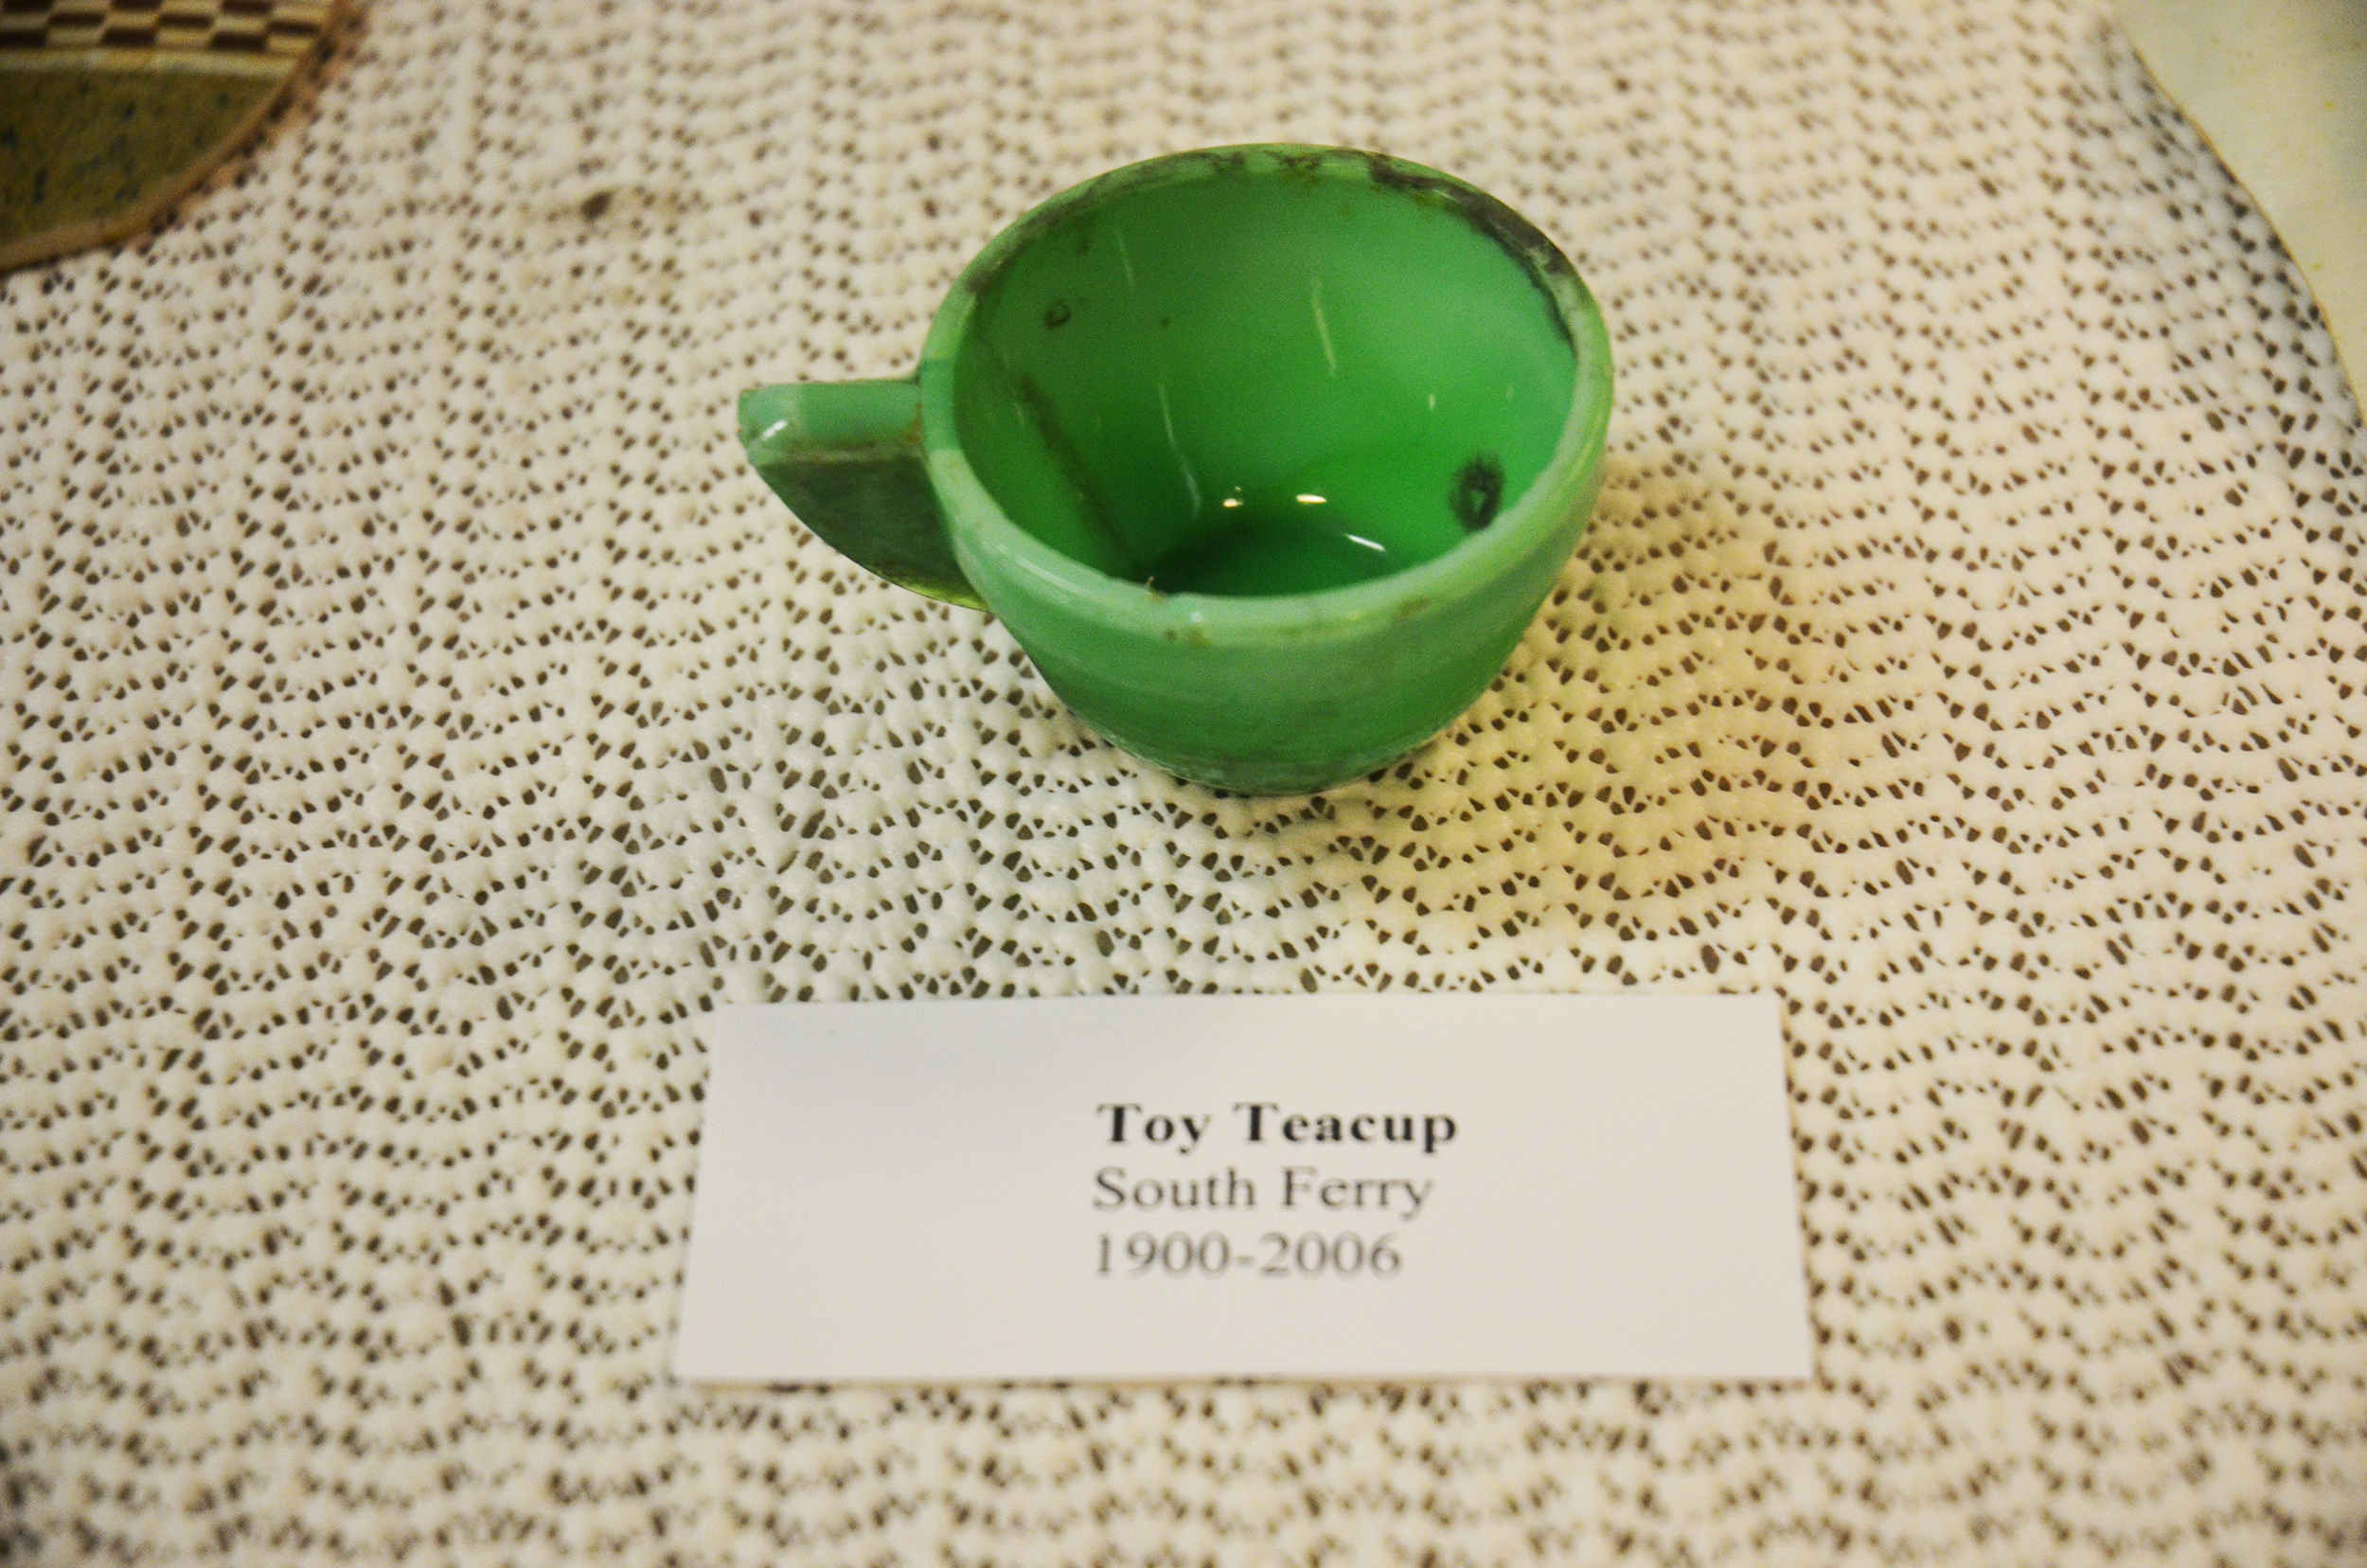 Toy teacup found at South Ferry